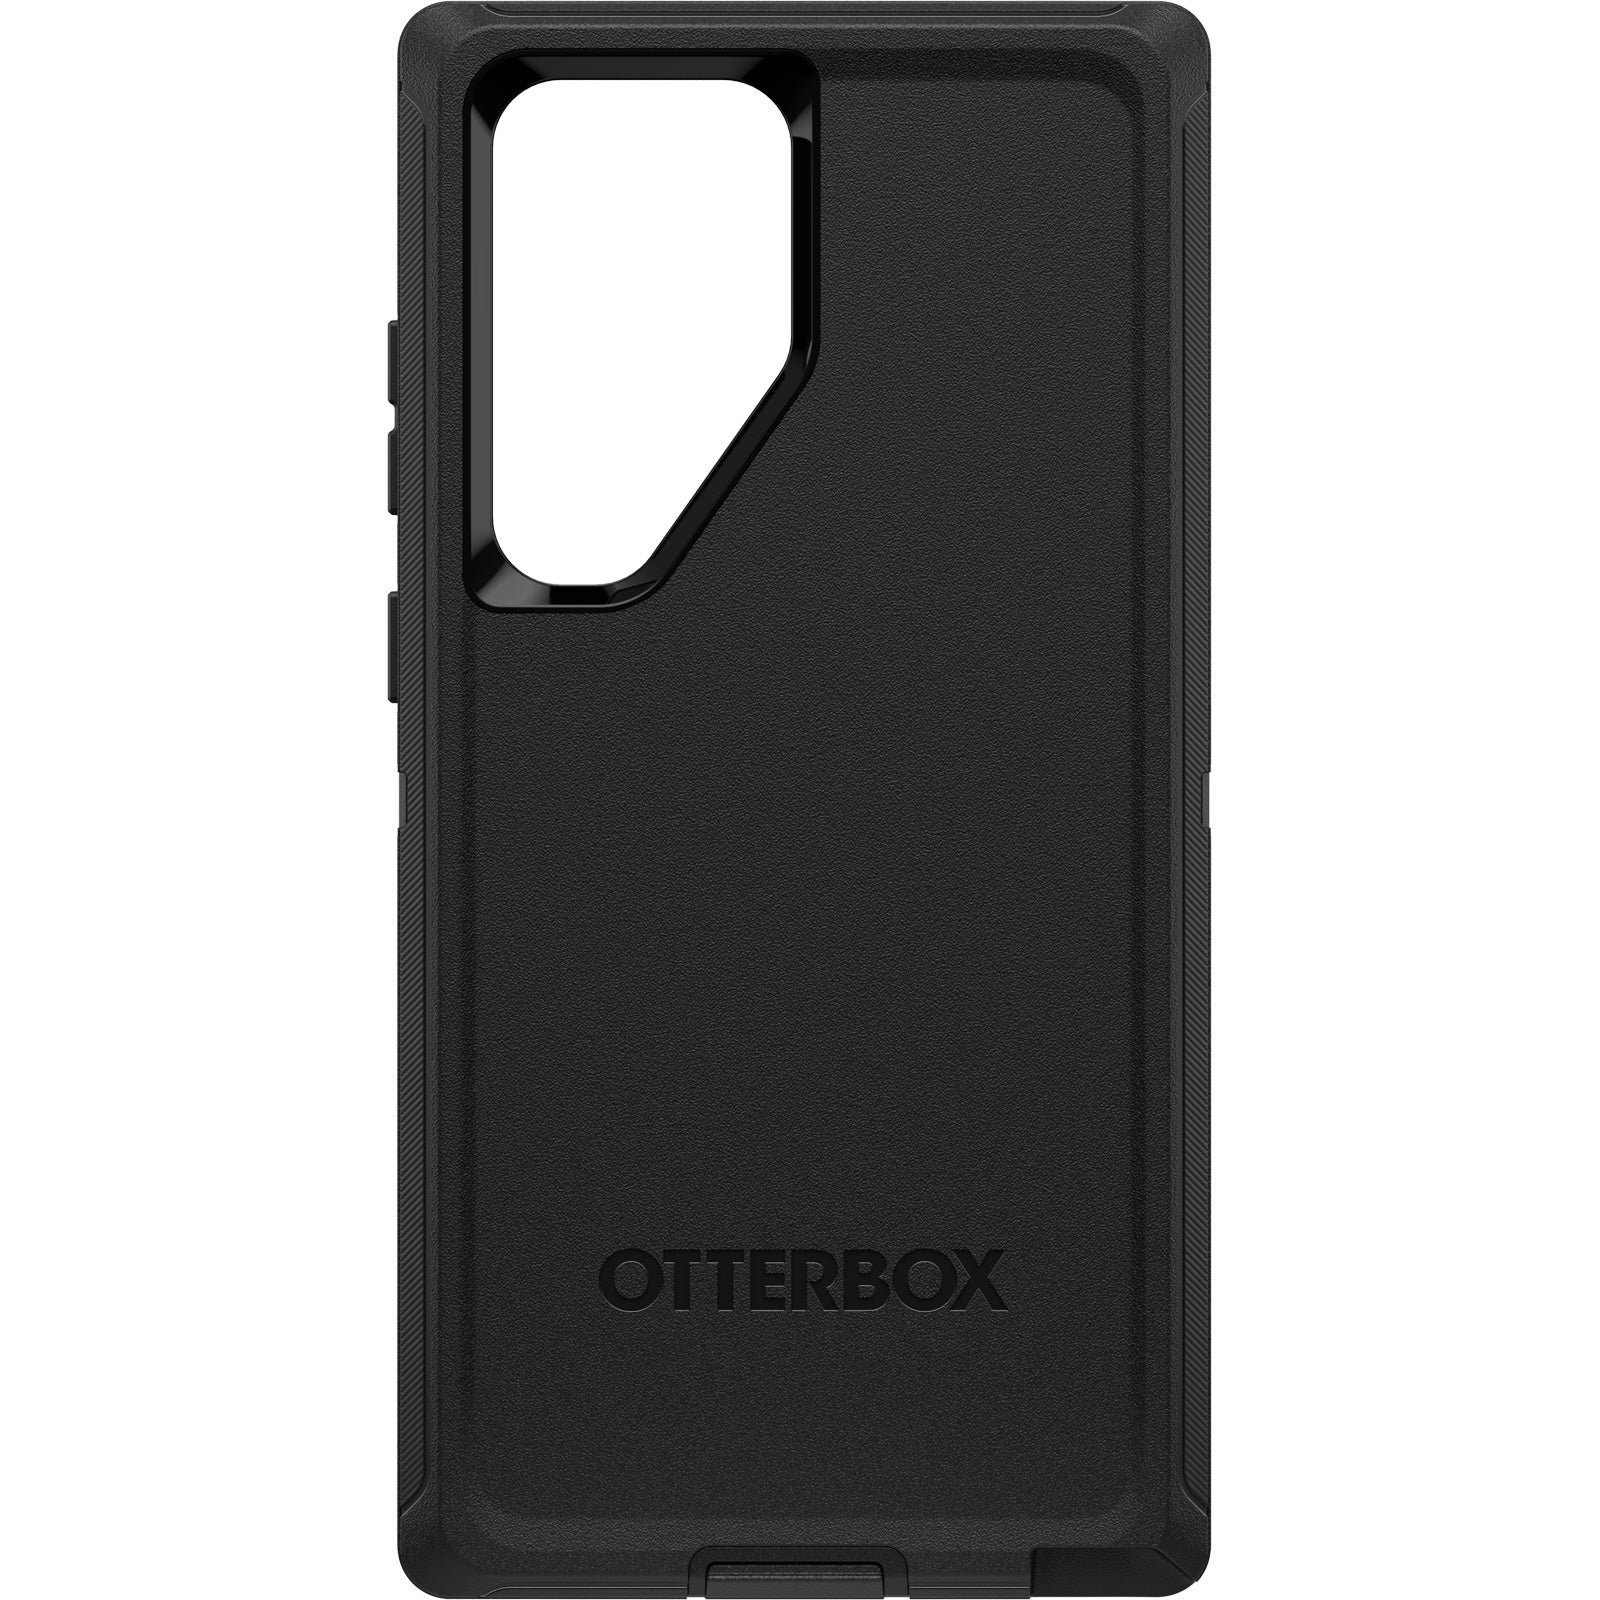 OtterBox Defender Case for Galaxy S23 Ultra, Shockproof, Drop Proof, Ultra-Rugged, Protective Case, 4x Tested to Military Standard, Black